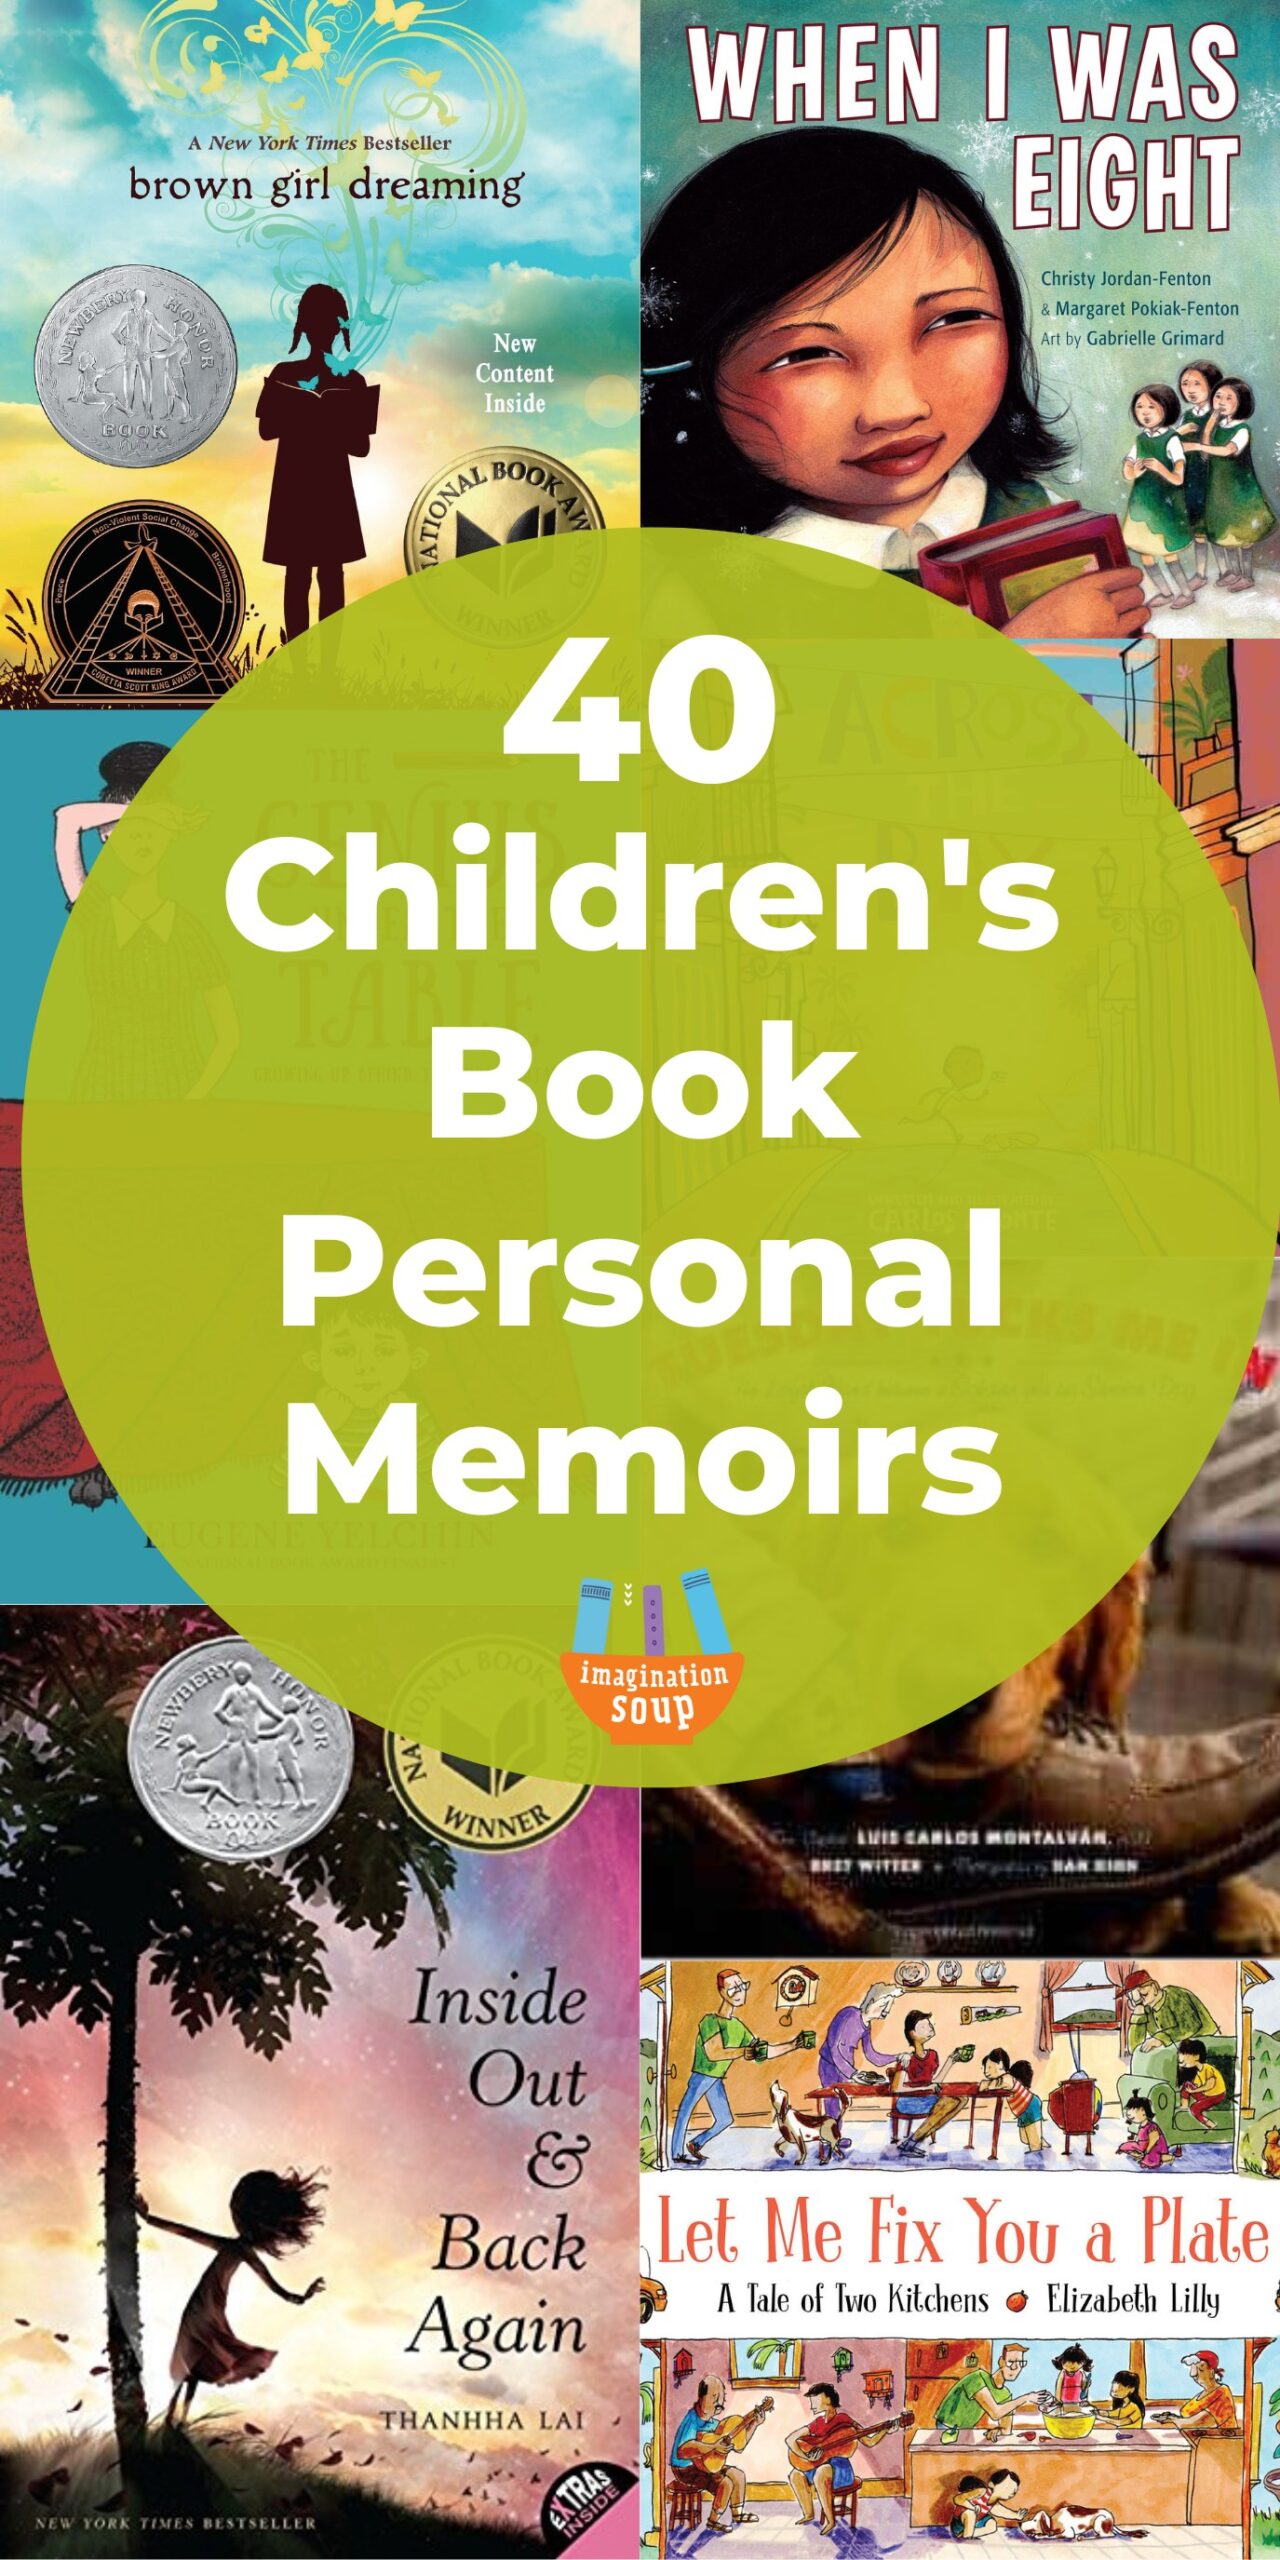 Read personal narrative examples in children's books, including picture books and middle grade books. In other words, read someone's authentic memoir based on their life experience.